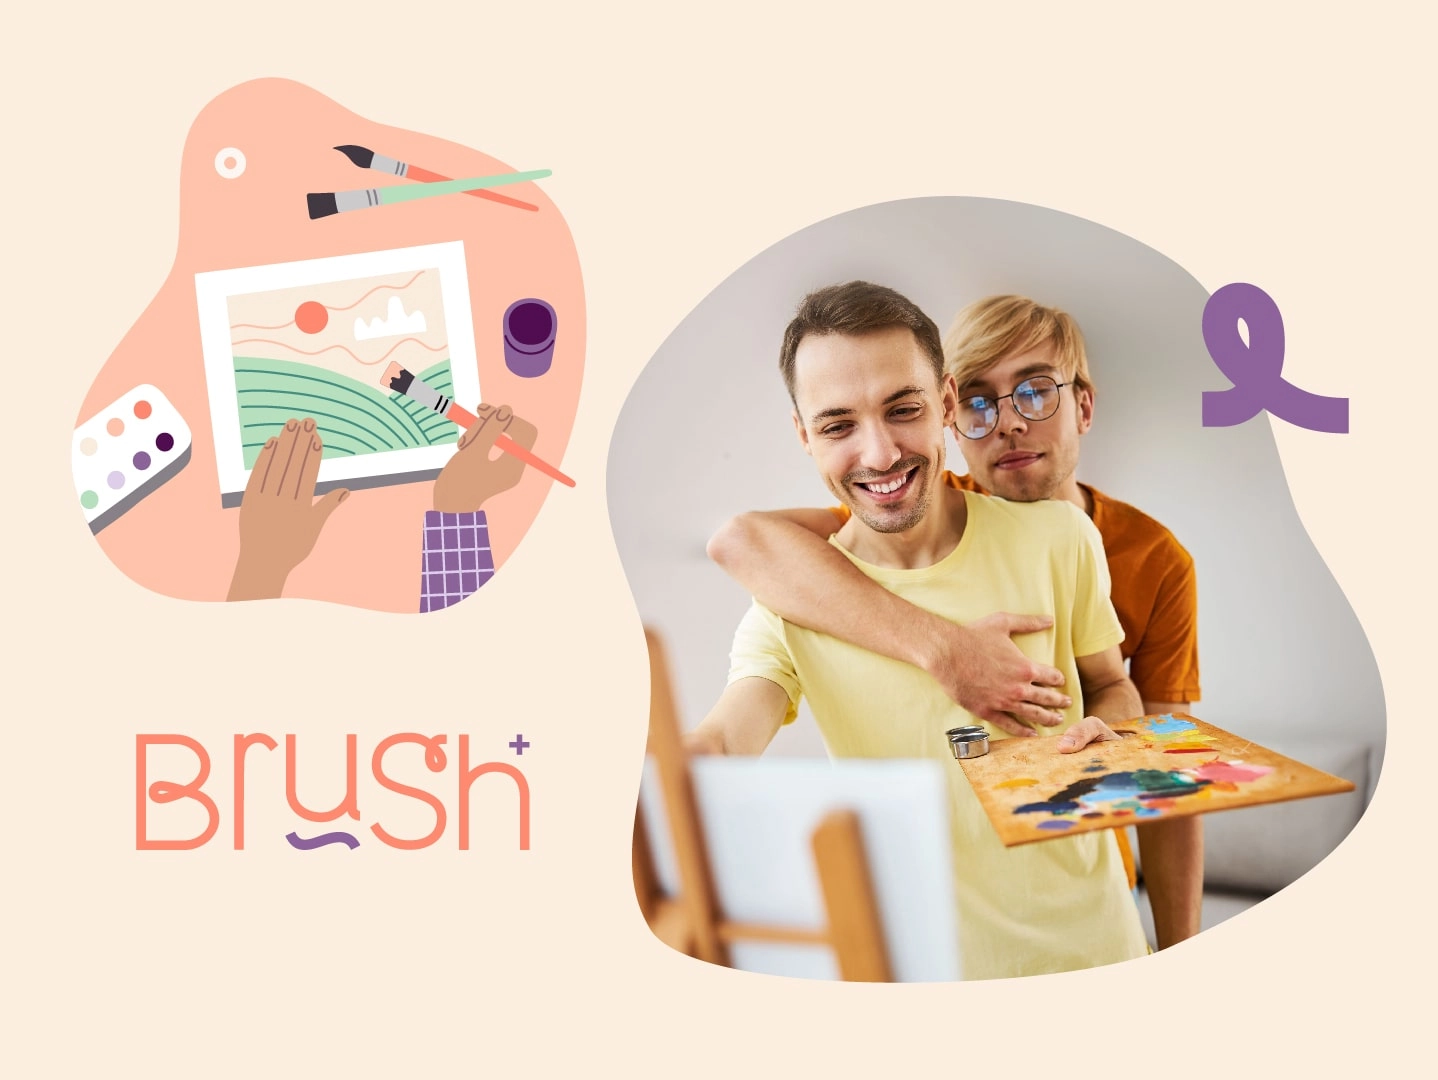 Logo and image of Brush, a marketing project created by Komsulting for the self-employed Anna Kniaz.